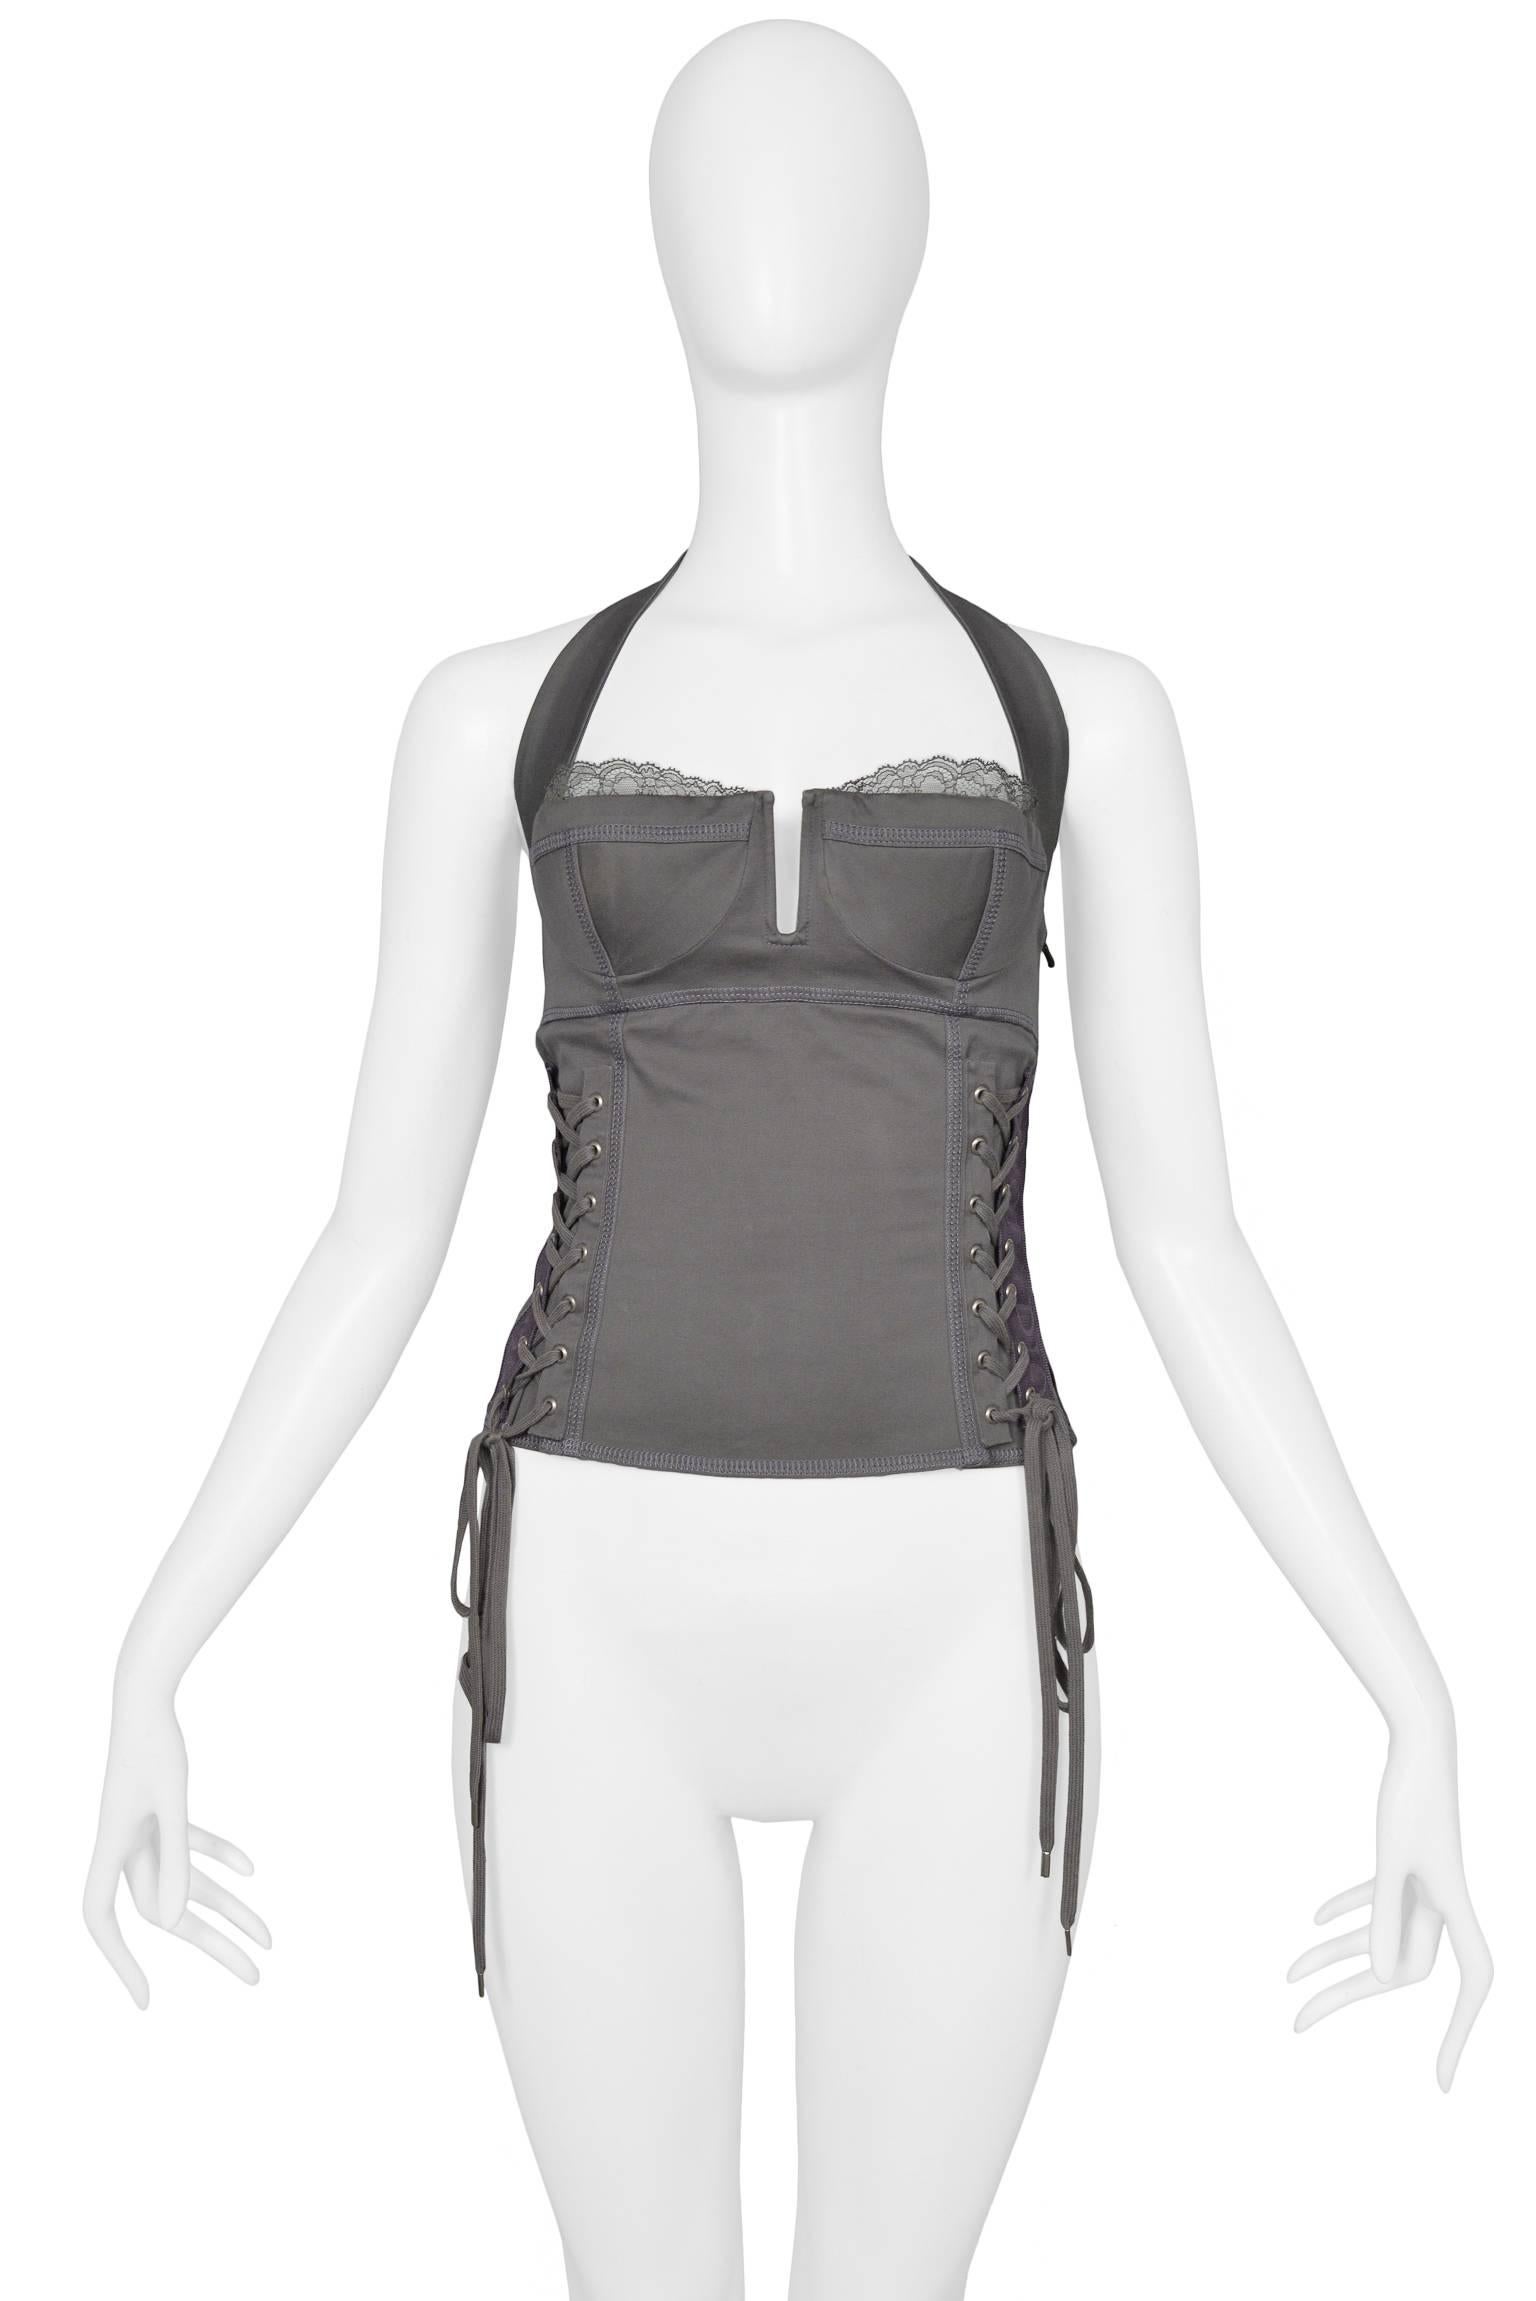 Dior by John Galliano grey cotton bustier with corset laces at side and "Dior " logo tape (See pics). Halter neck with star charm, open back, and lace over bra cups. Circa, 2004. 

Marked size 38 and fits like a today's small. 